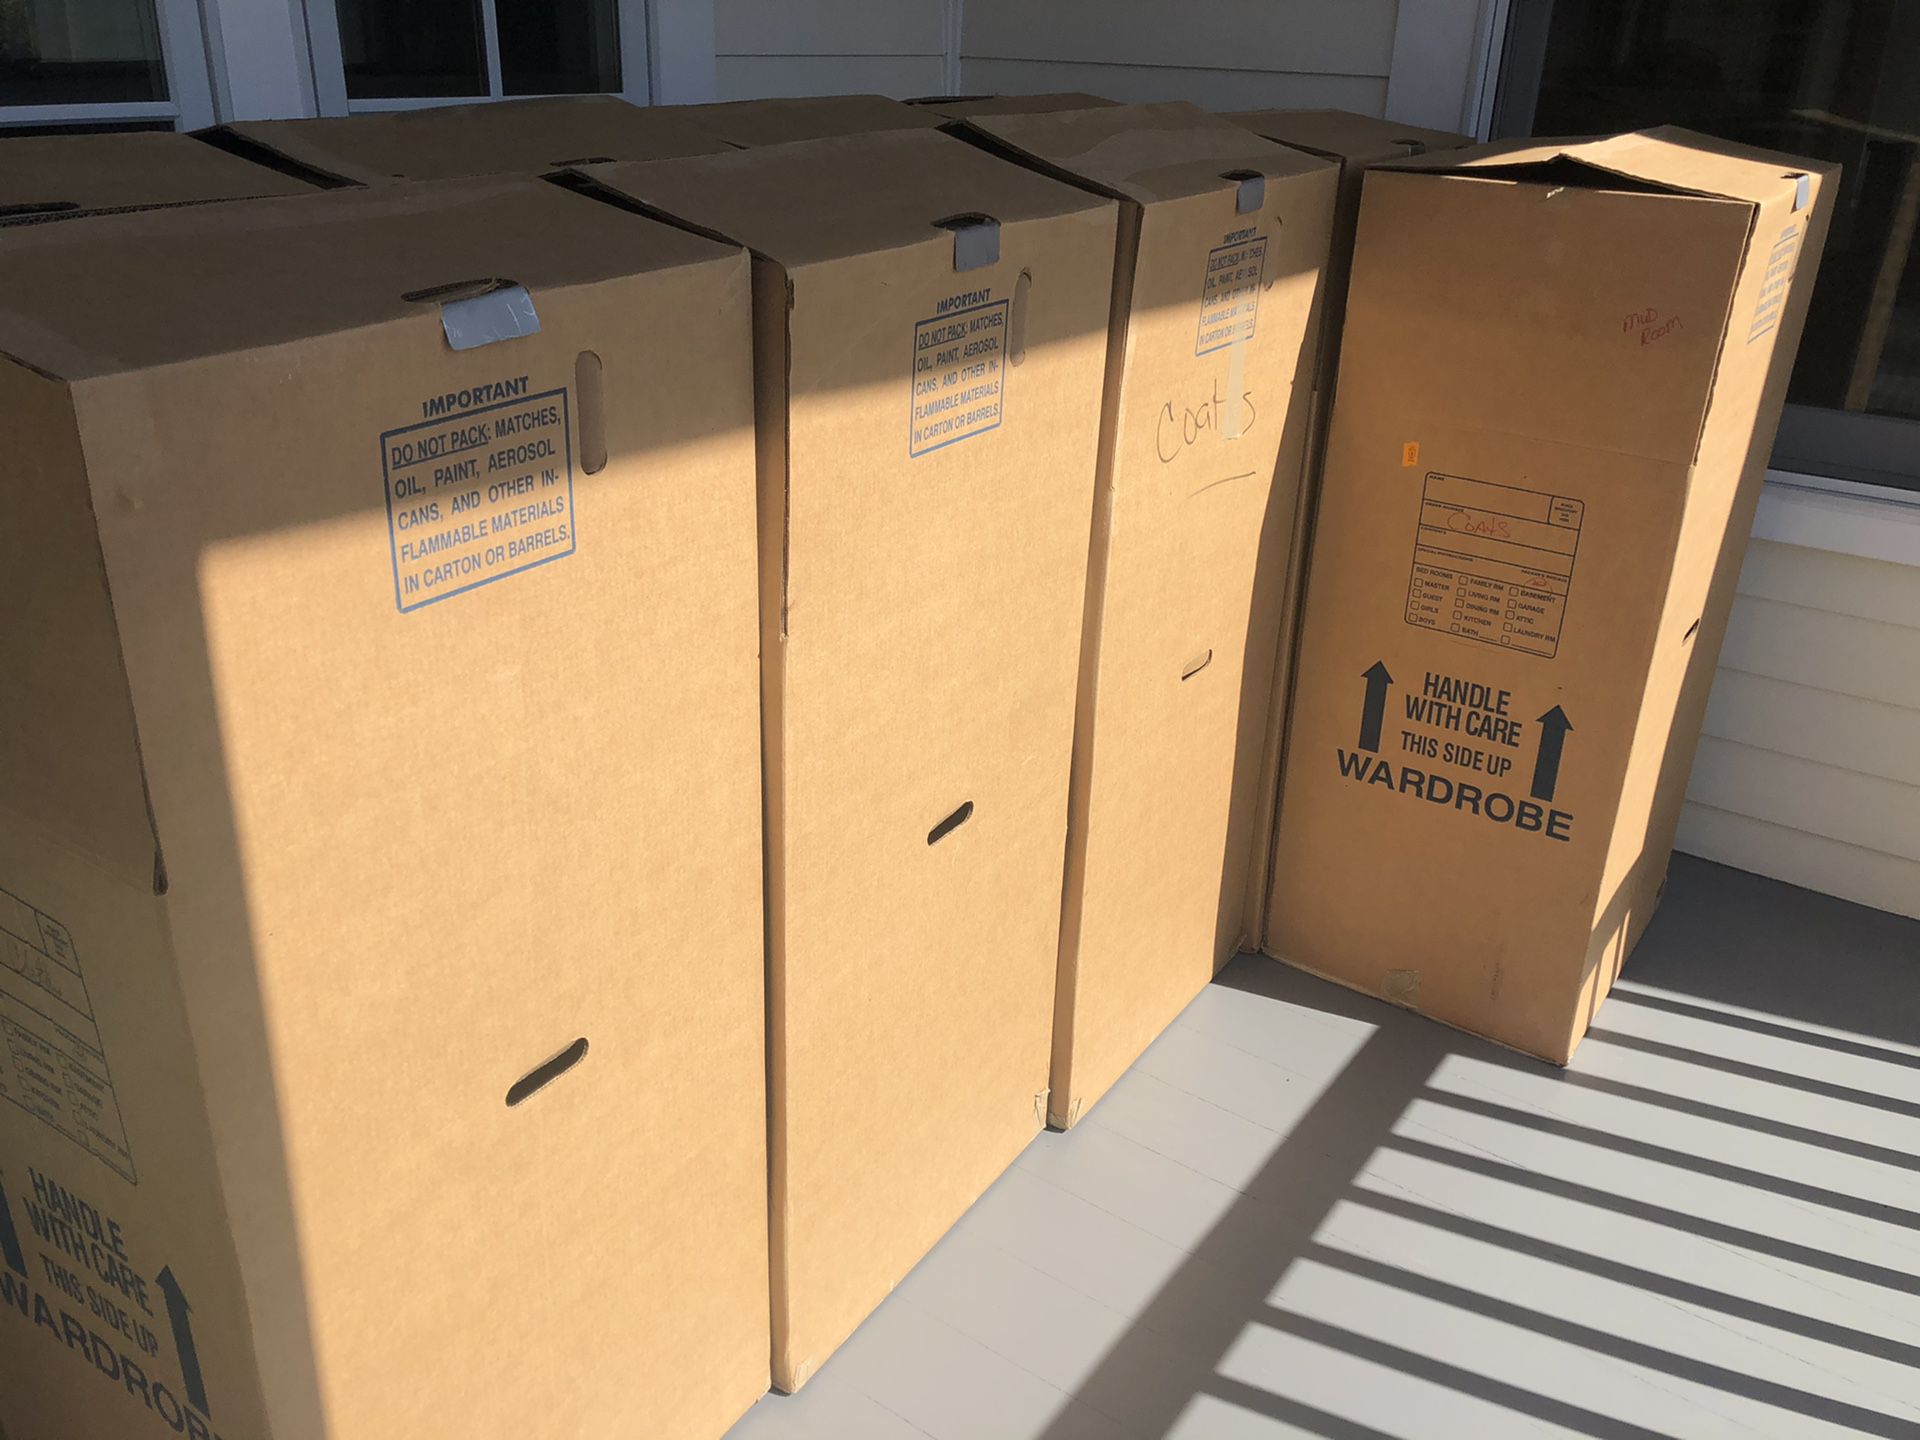 Free- just moved and have 9 clothes boxes